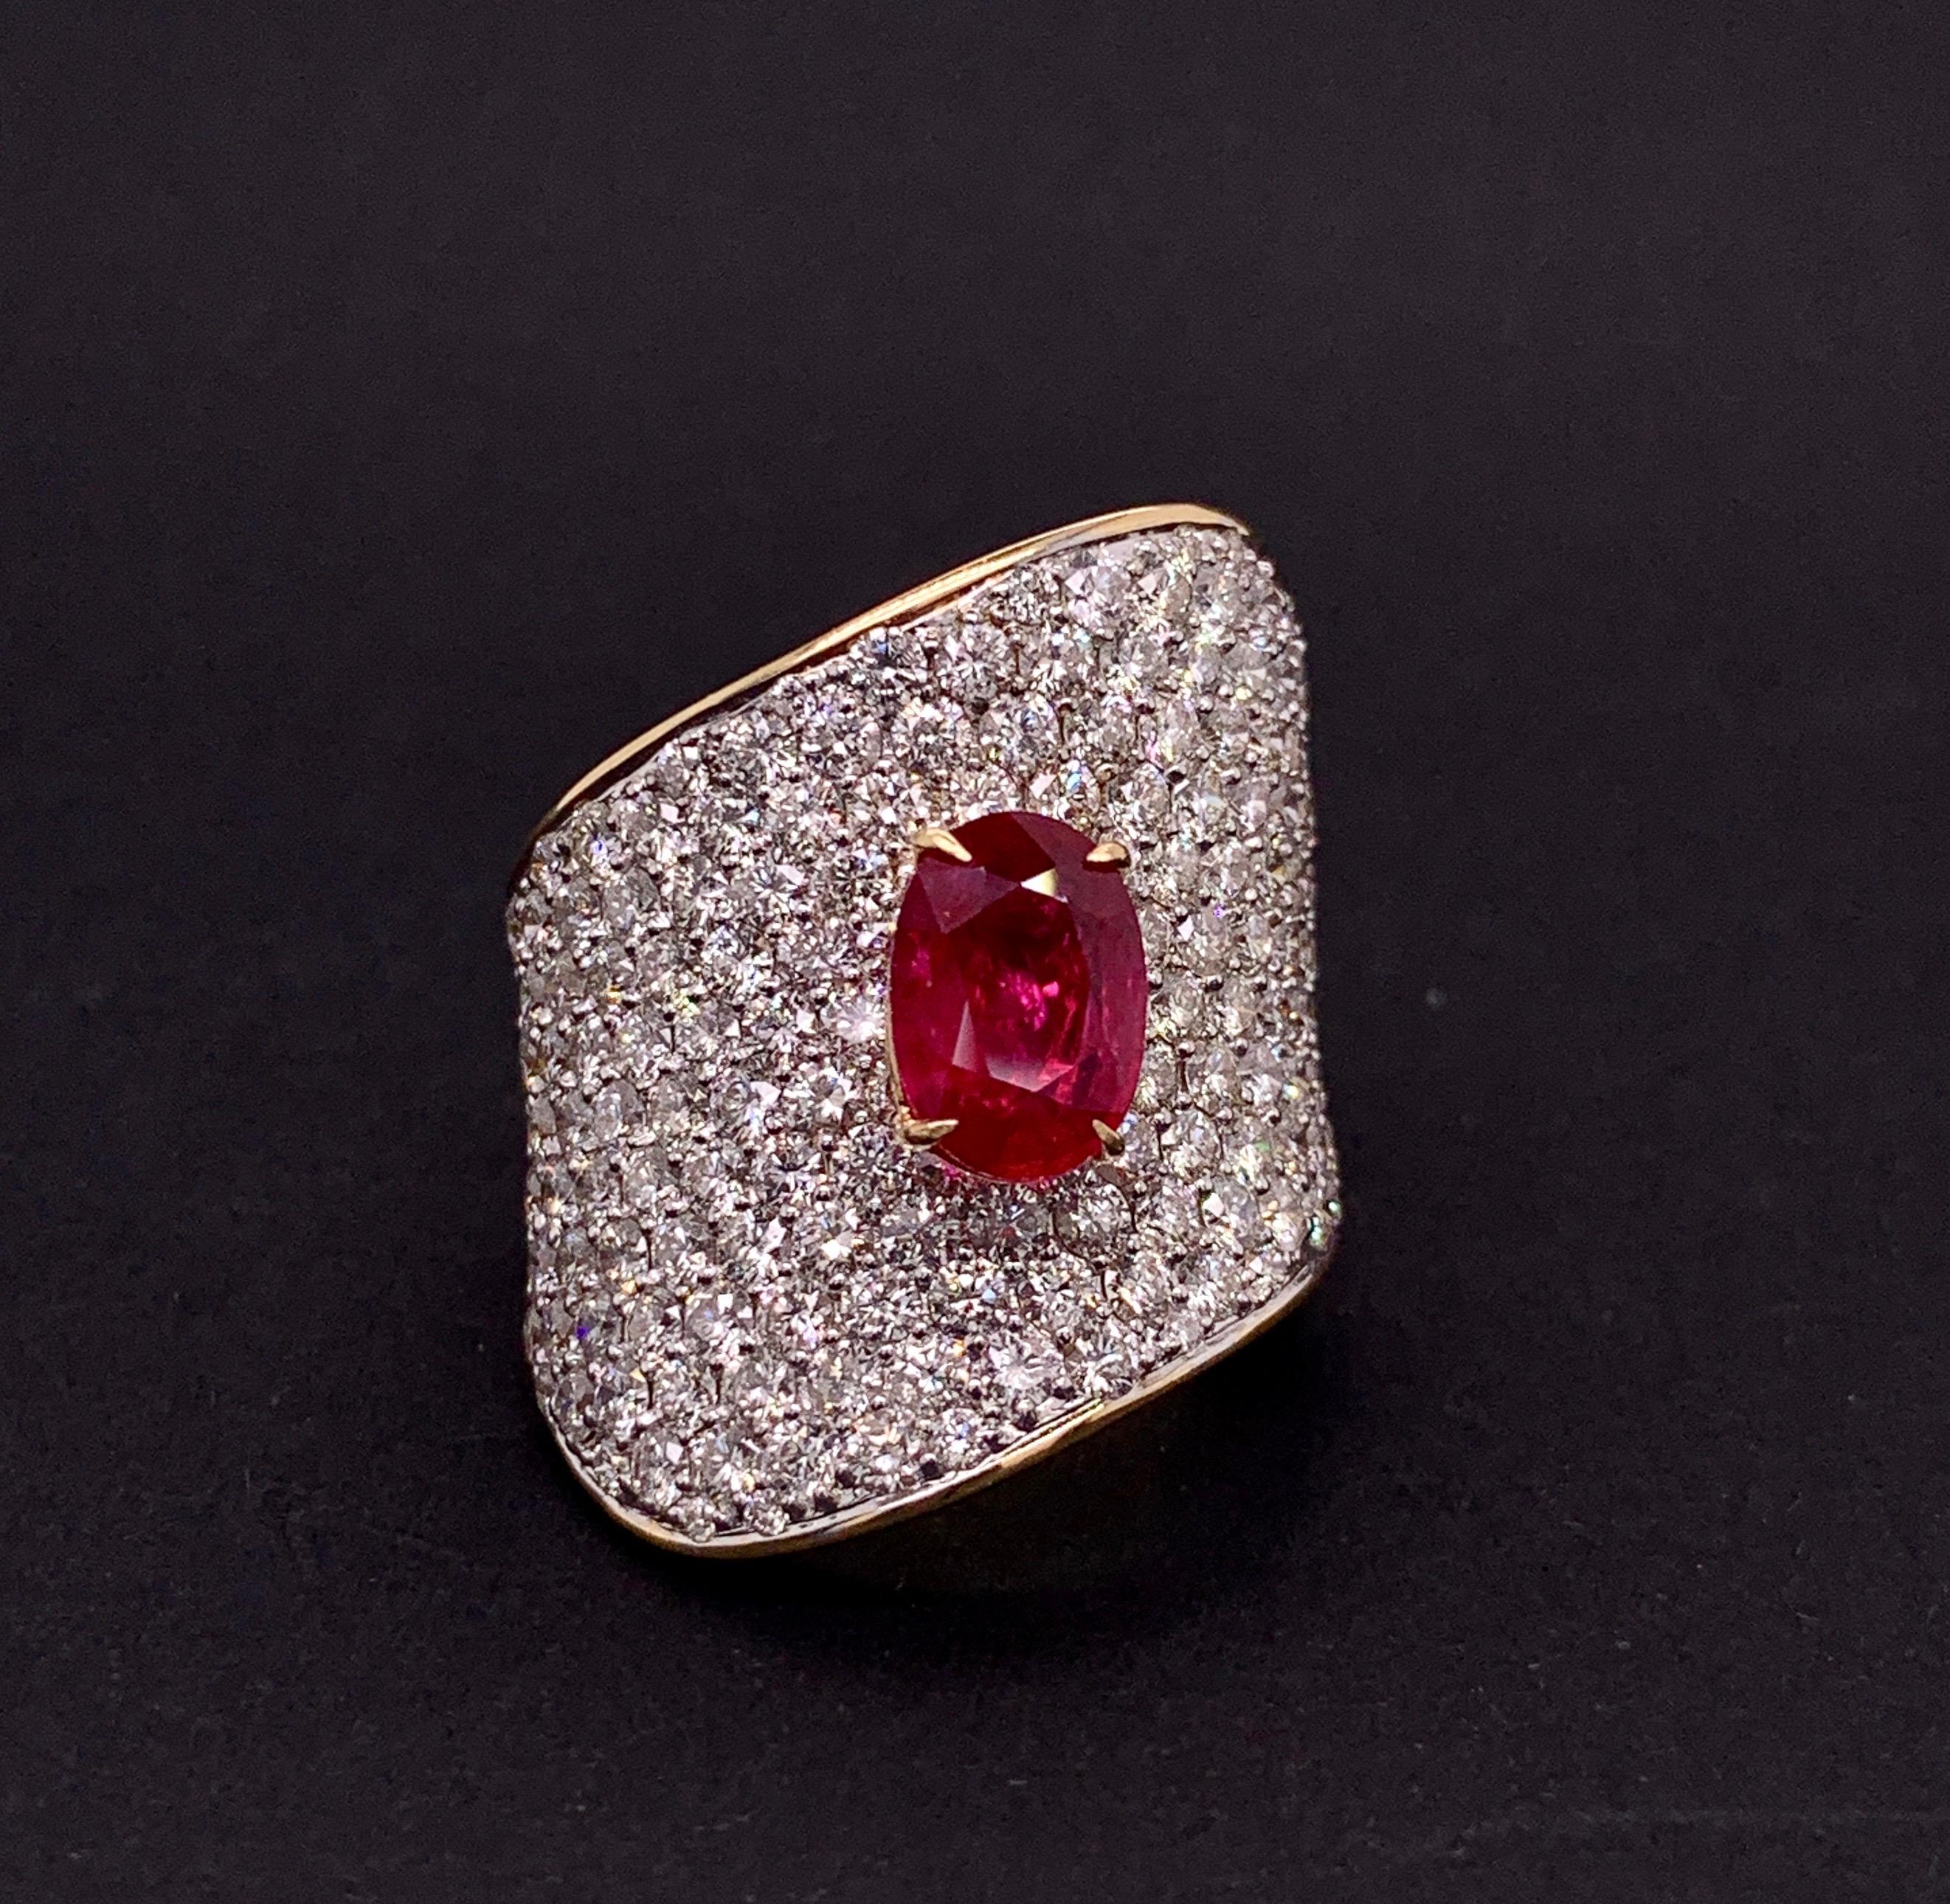 2.02 Carat Unheated Ruby Diamond Cocktail Ring For Sale 1